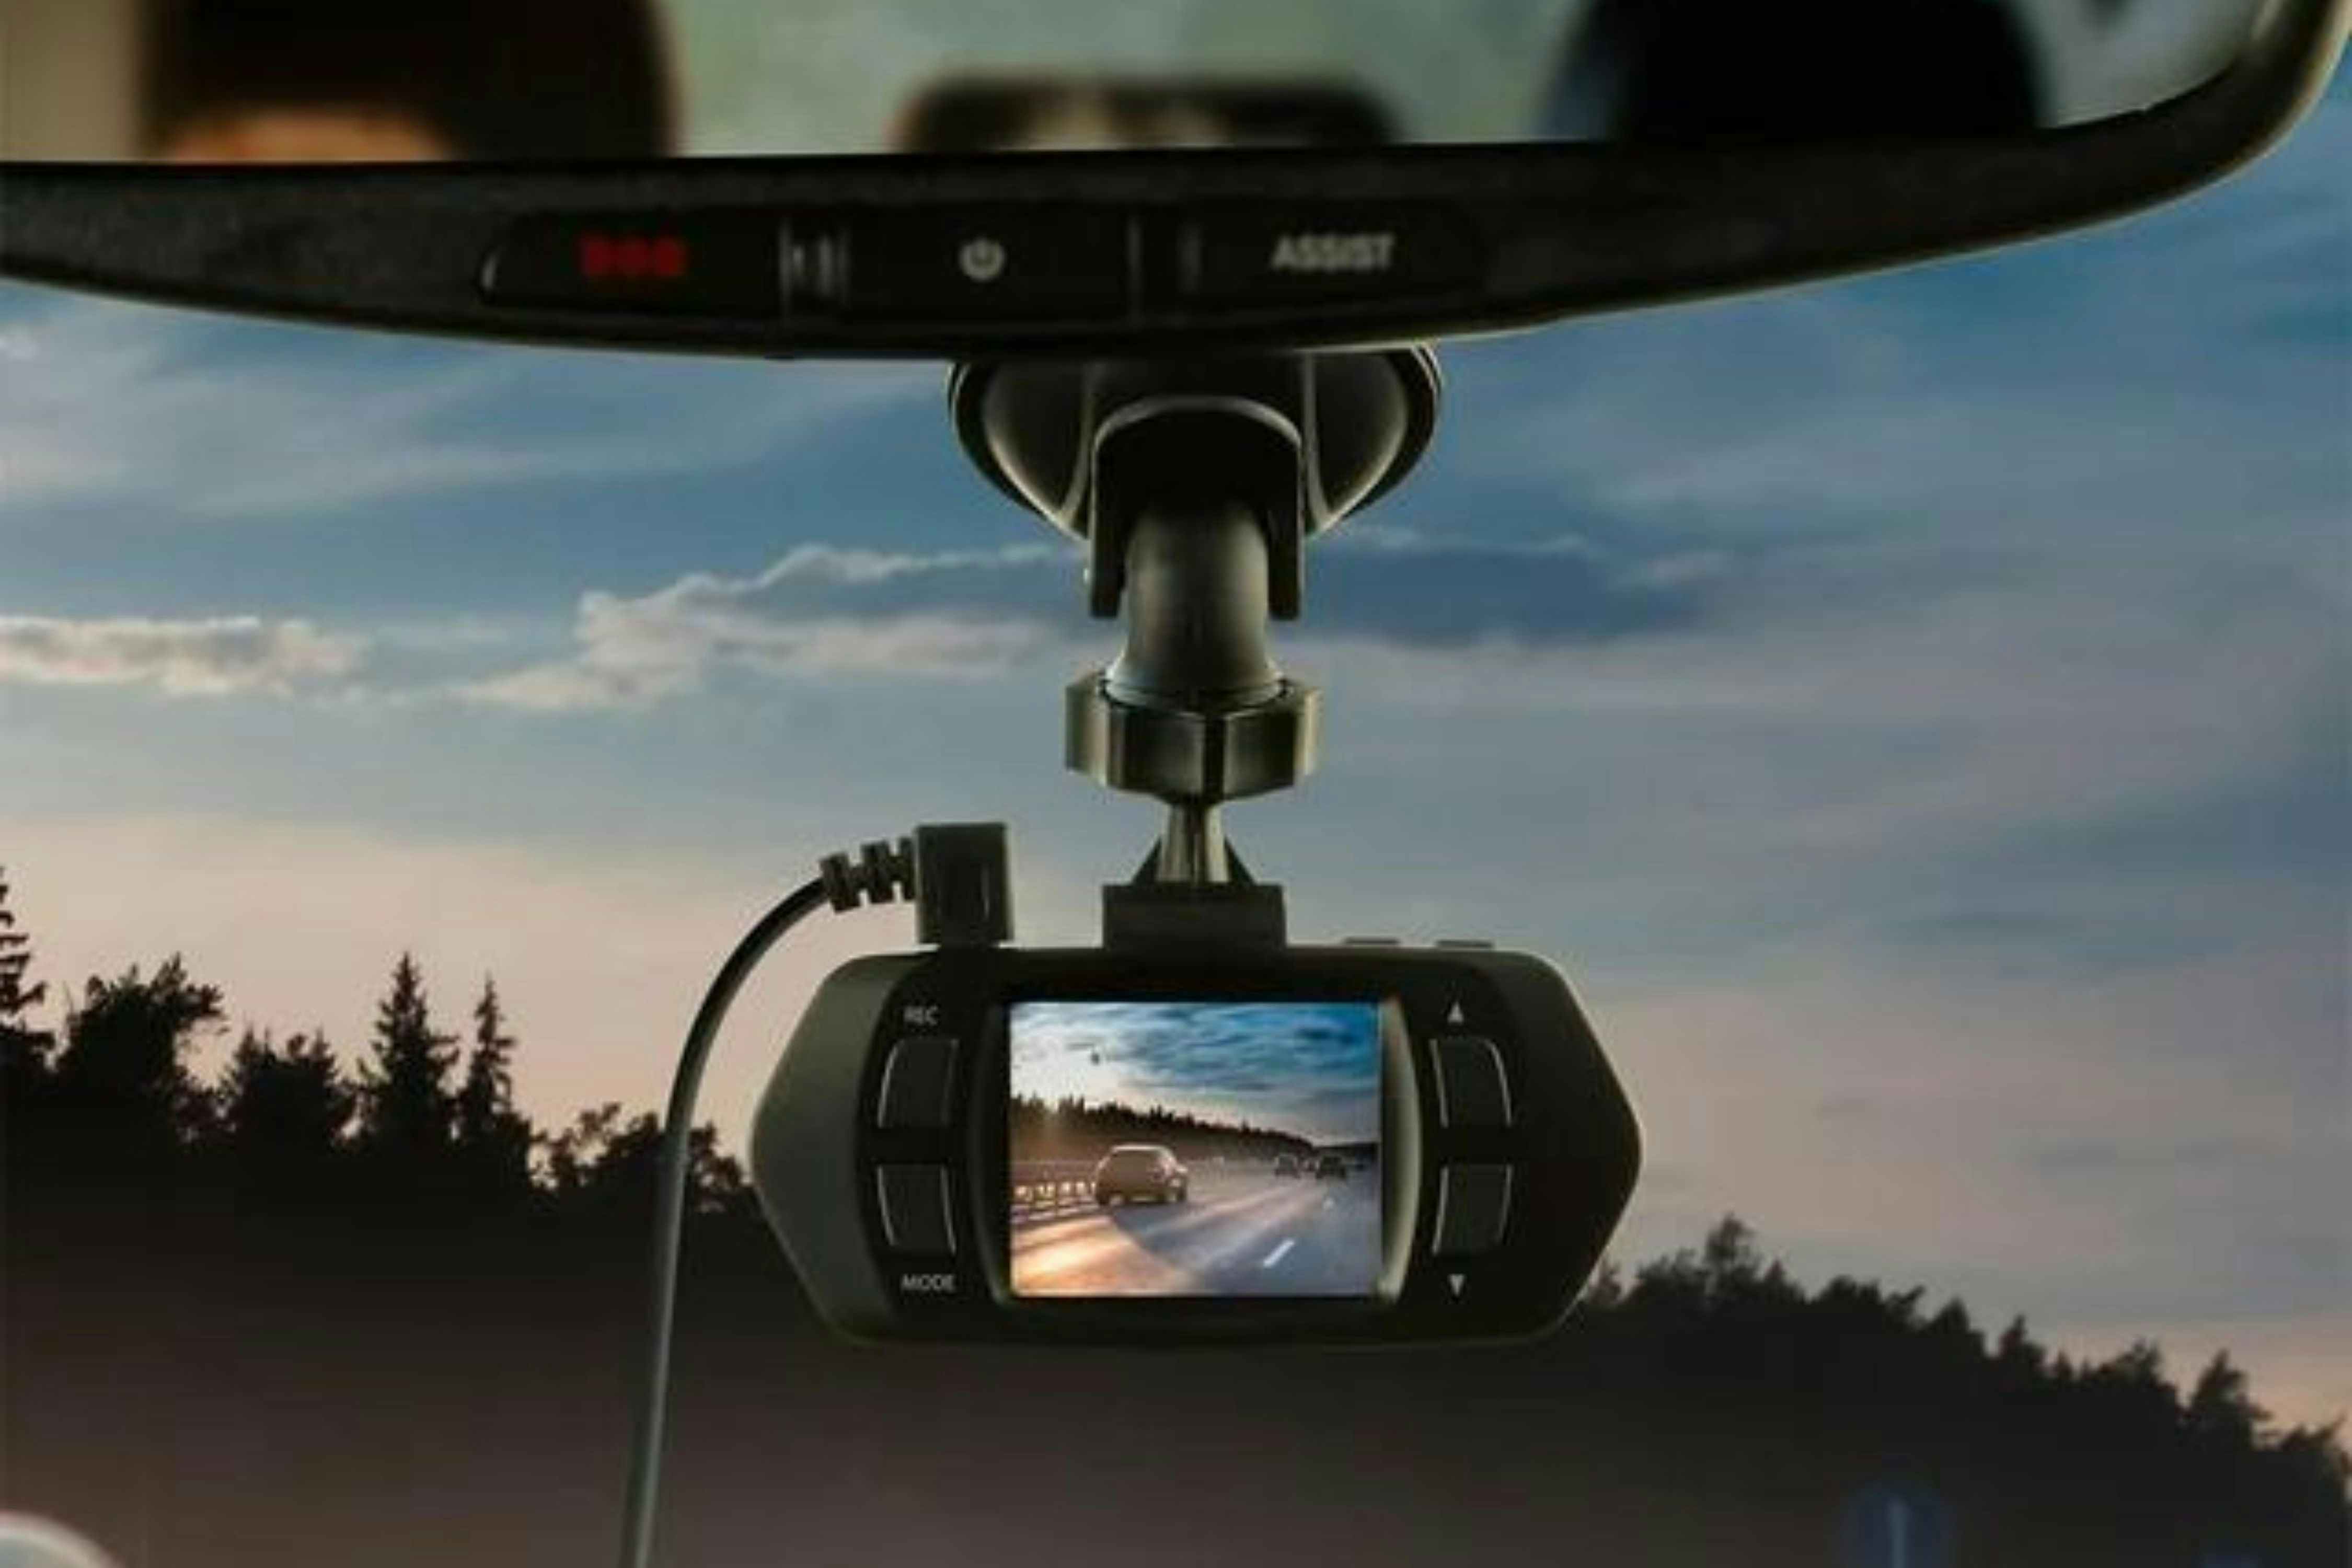 Score a Dash Cam for Only $3.91 at Walmart